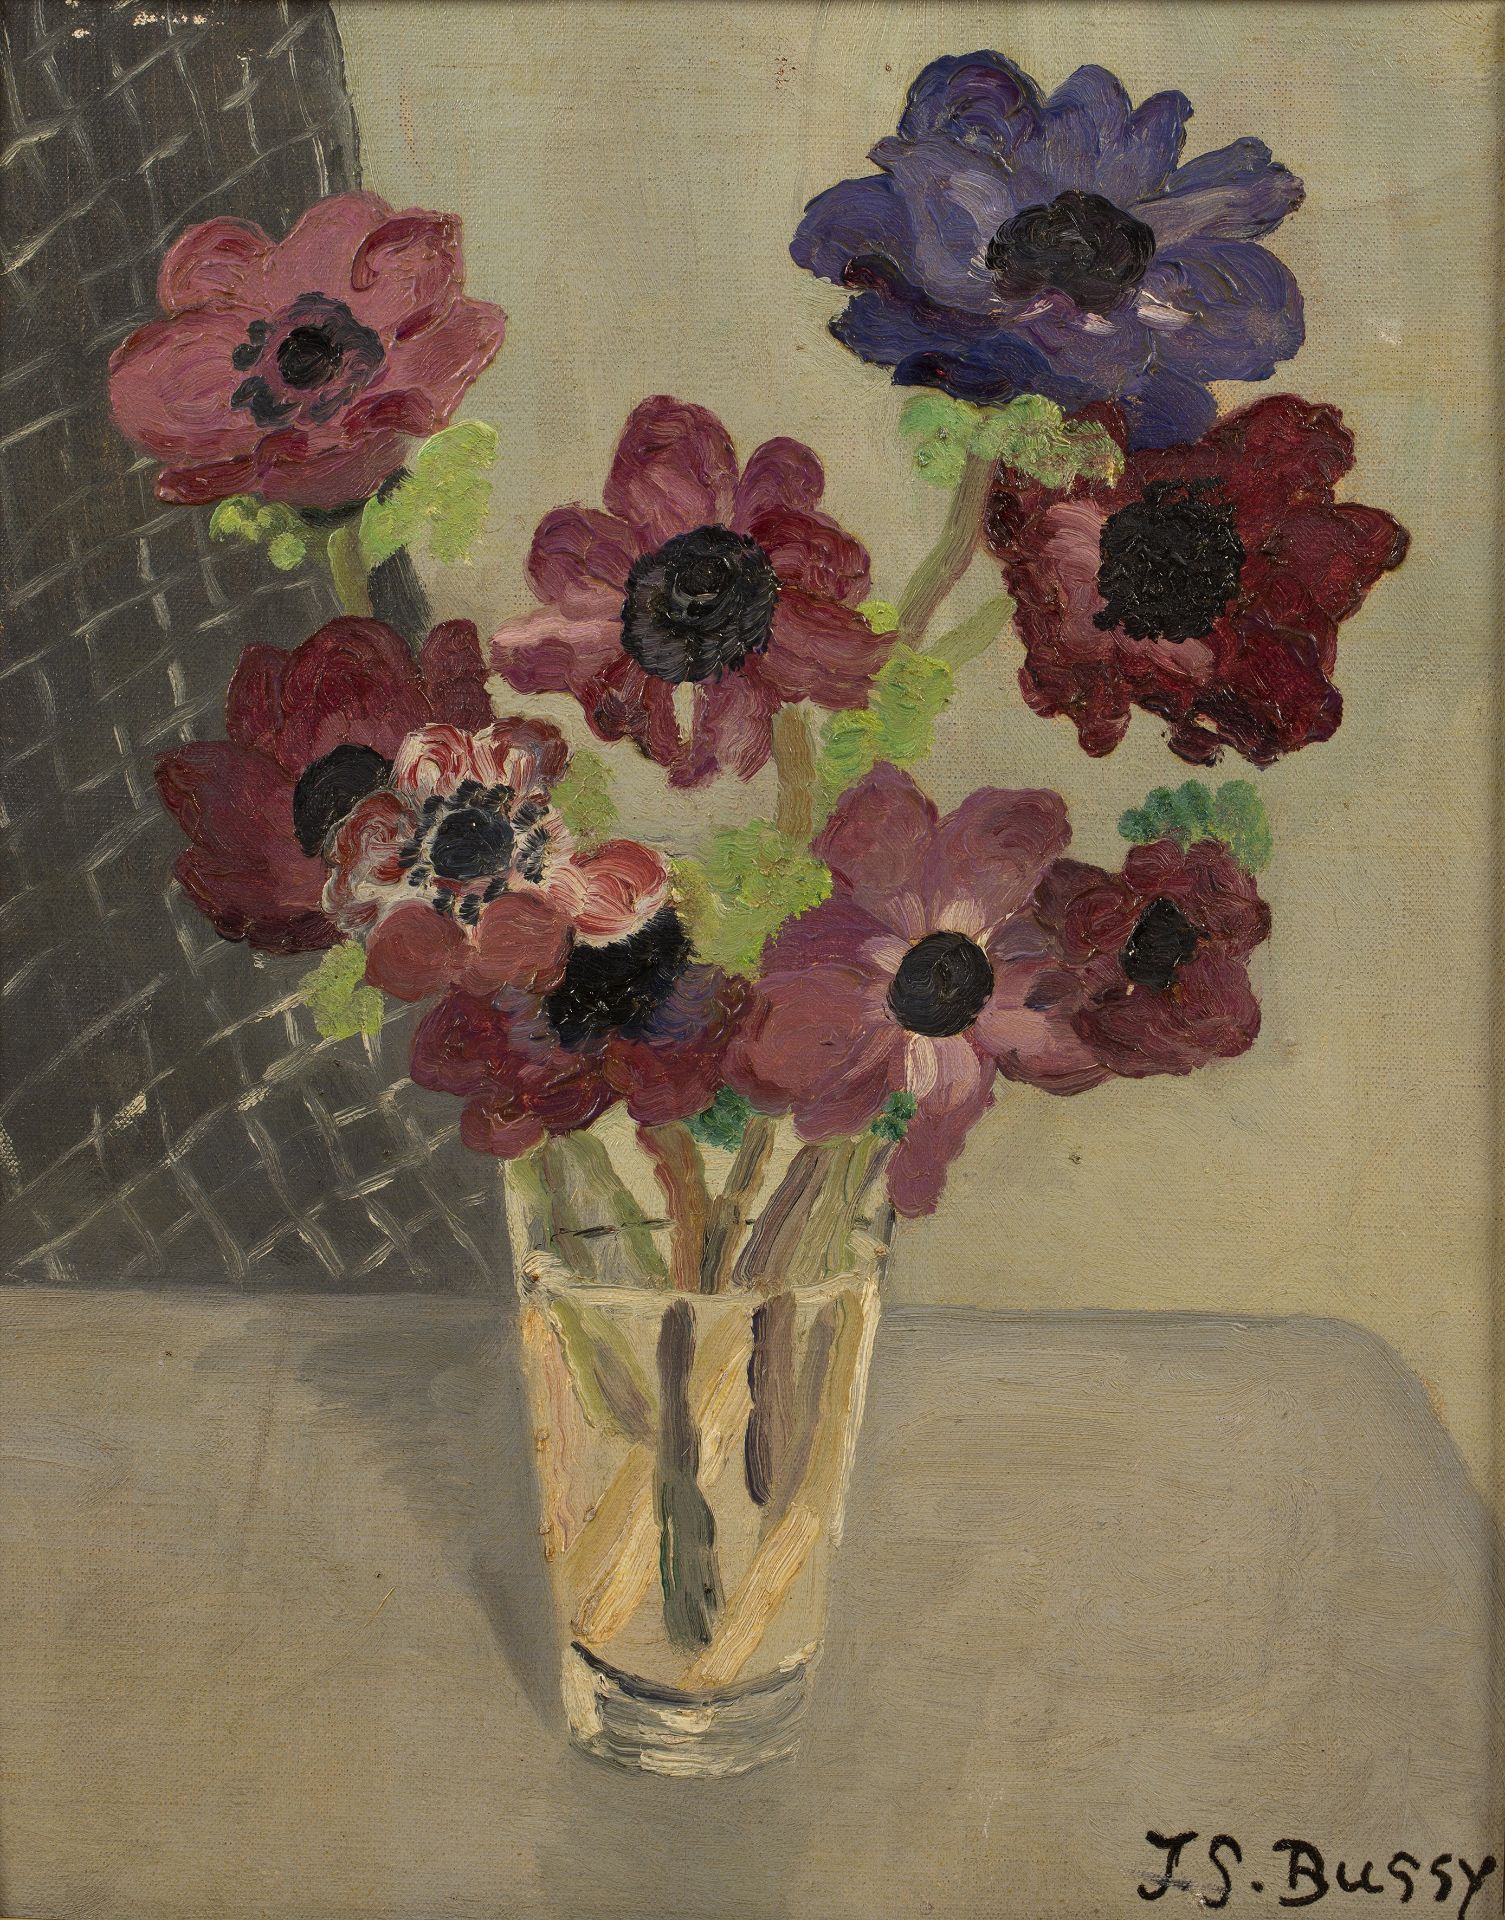 Jane Bussy (1906-1960) 'Vase of Flowers', oil on canvas, signed 'J.S Bussy' to the lower right, 32cm